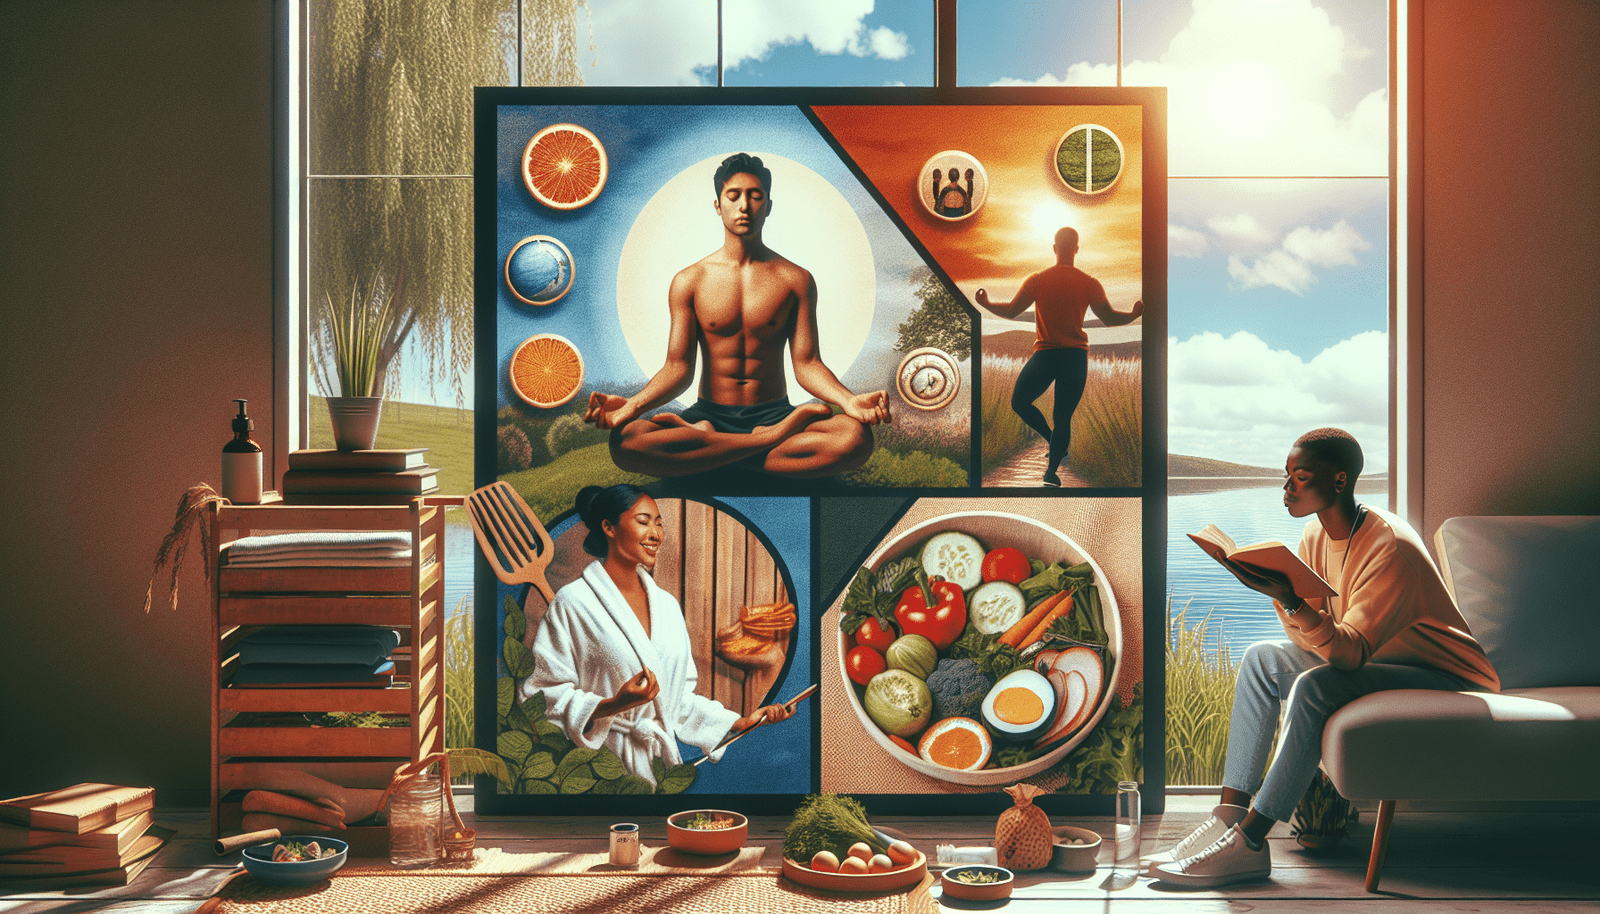 Wellness Practices for a Well-rounded Life